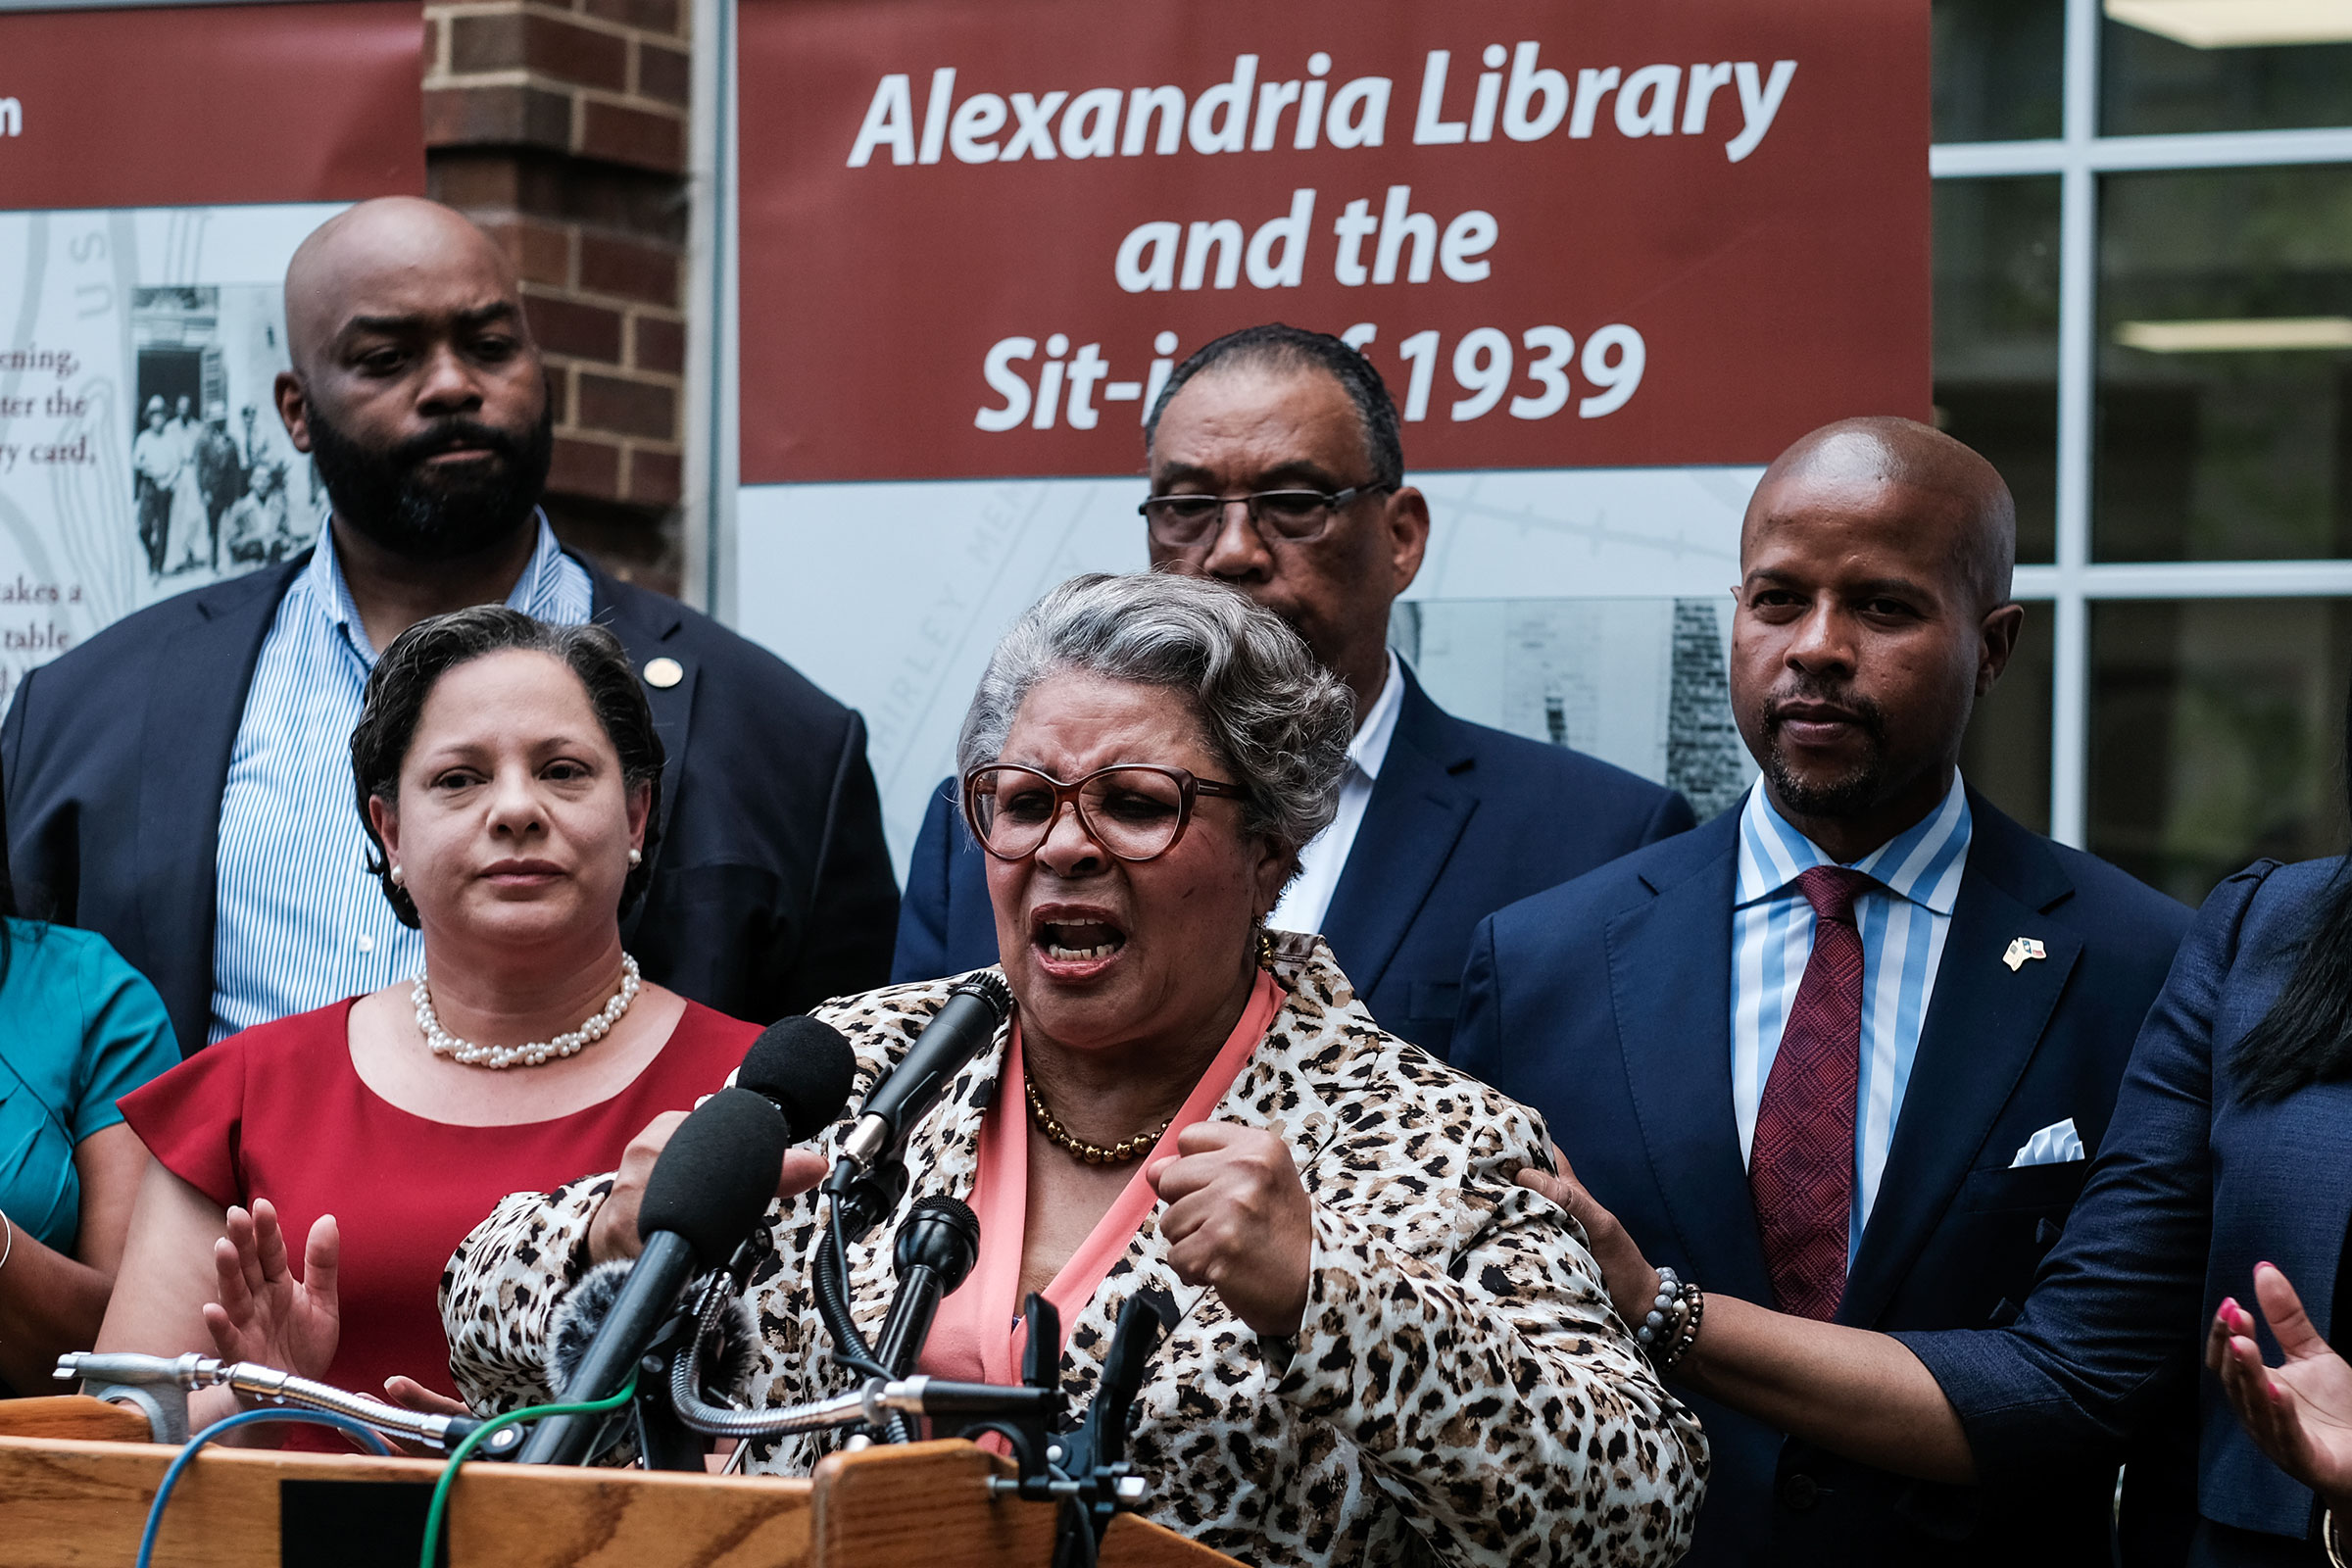 Rep. Thompson speaks at a press conference on voting rights outside of the Kate Waller Barrett Branch Library in Alexandria, Va., on July 16. (Michael A. McCoy for TIME)